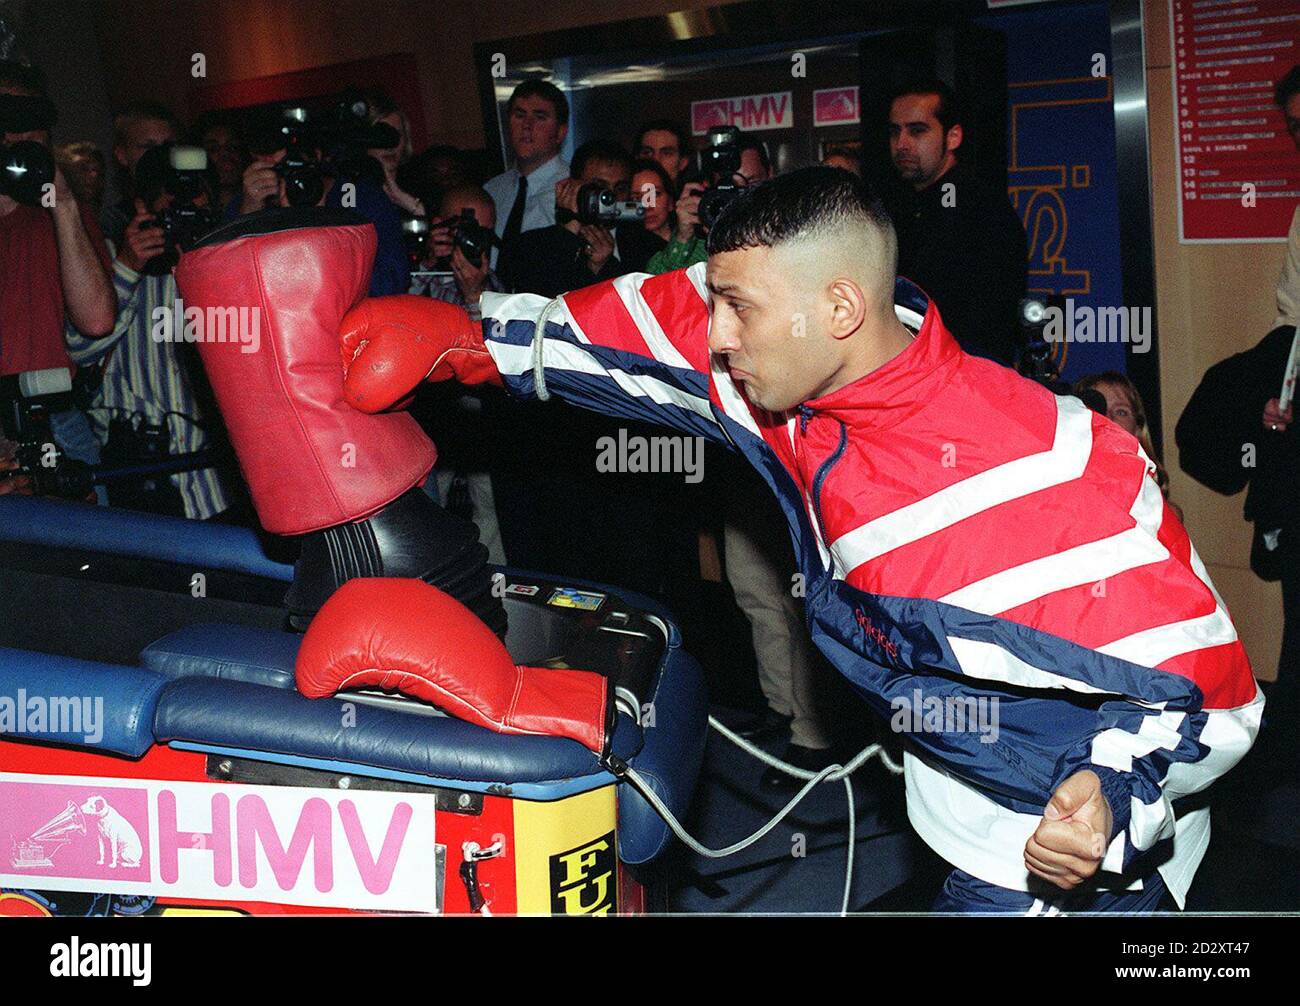 WBO and IBF champion Prince Naseem Hamed, shows his form, as he launches his new video - The Prince Who Is King, at HMV, in London today (Friday). Photo by Sam Pearce. Stock Photo